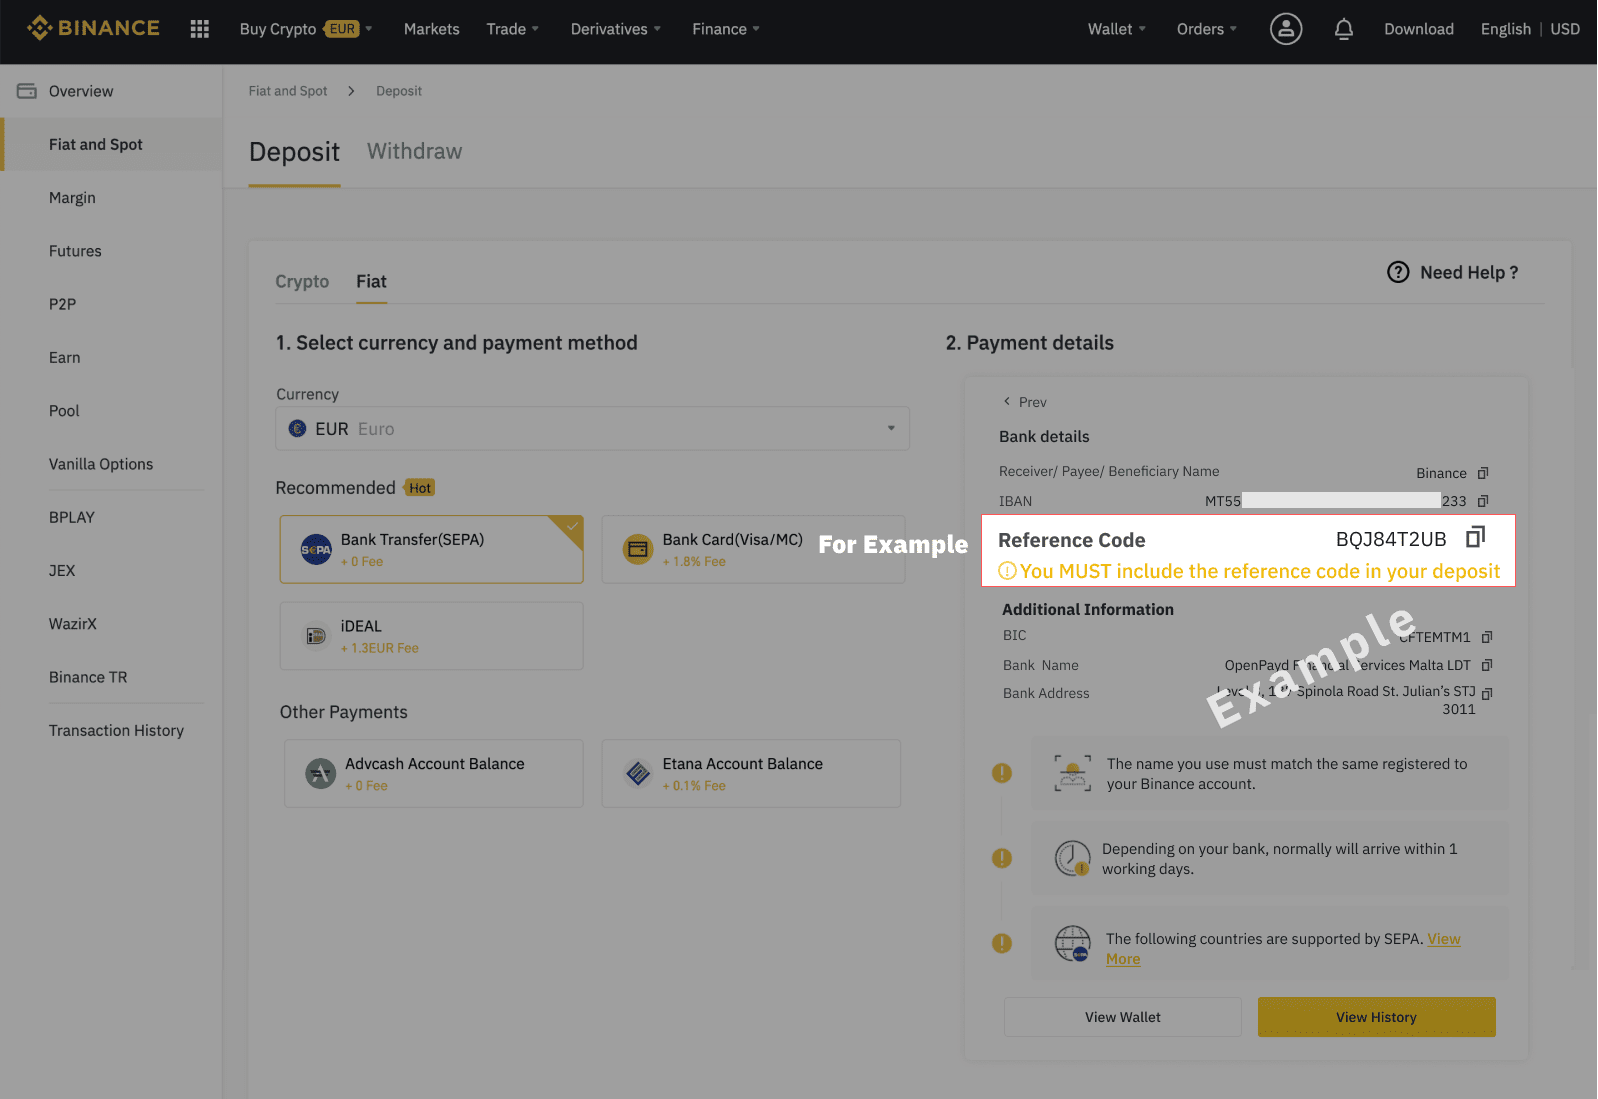 How to Deposit to Binance with French Bank: Credit Agricole